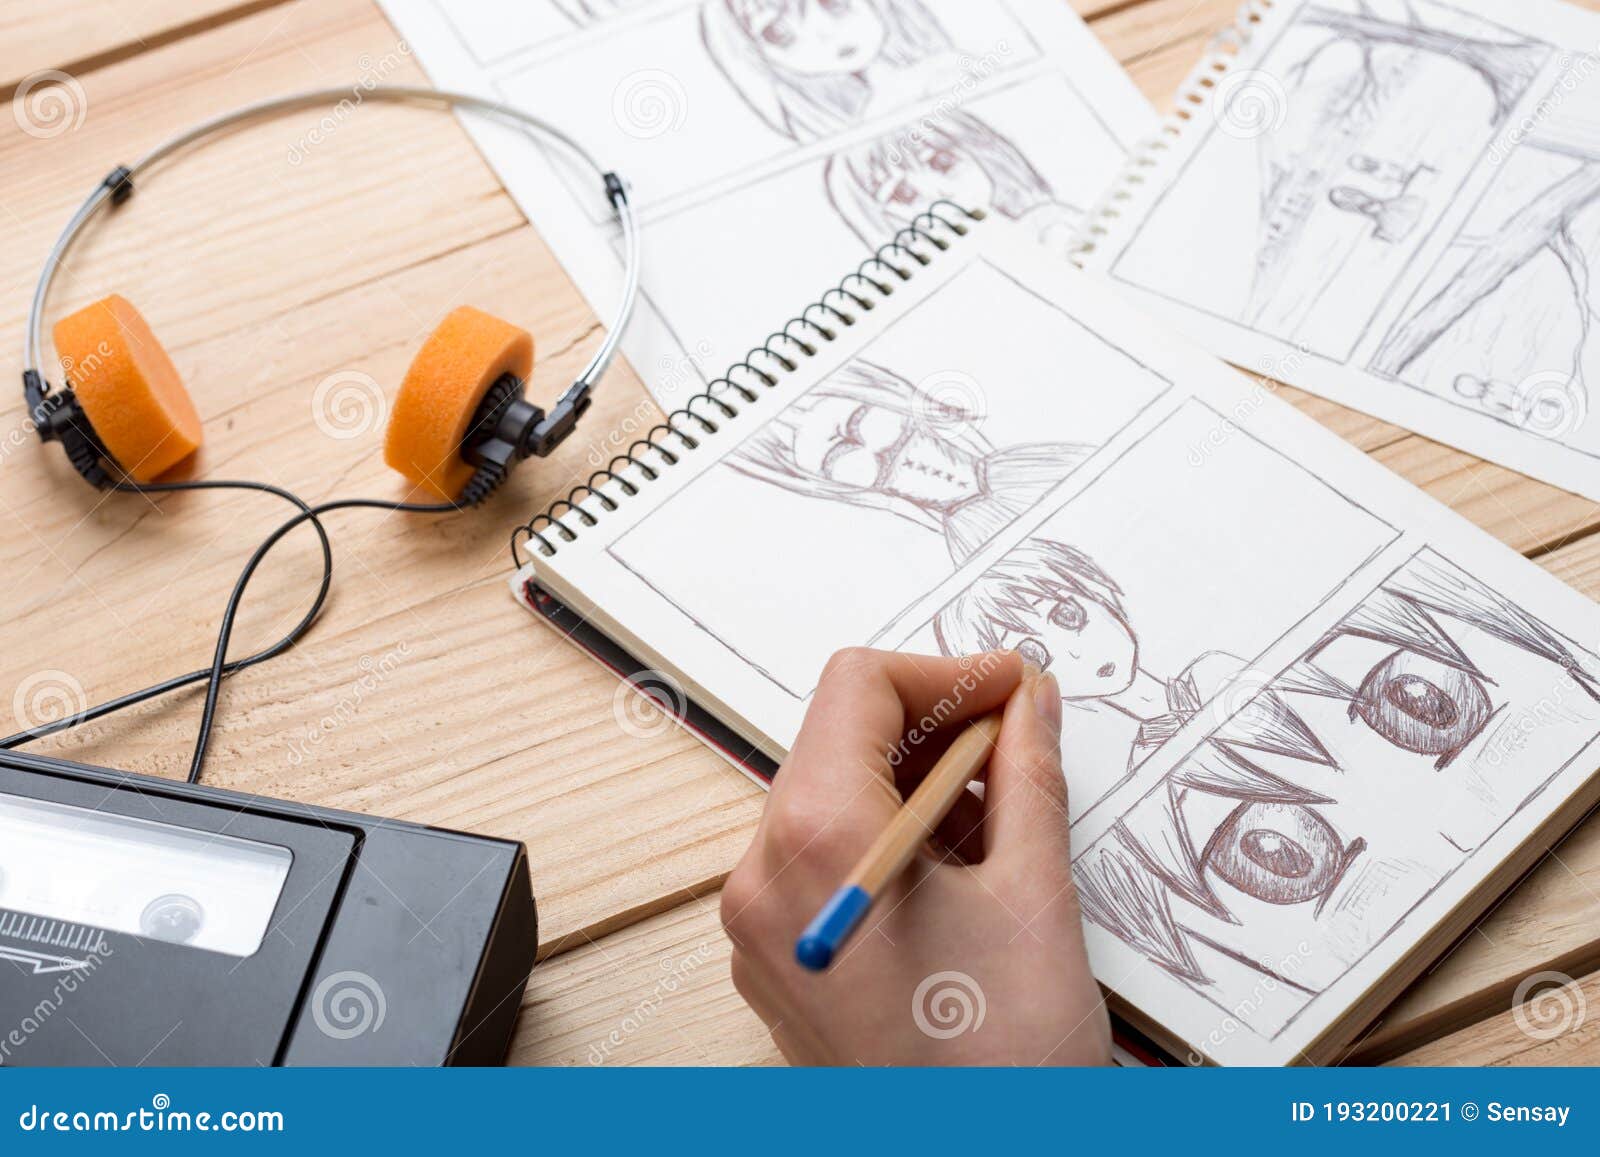 Artist Drawing an Anime Comic Book in a Studio Stock Image - Image of  creative, creativity: 193200221